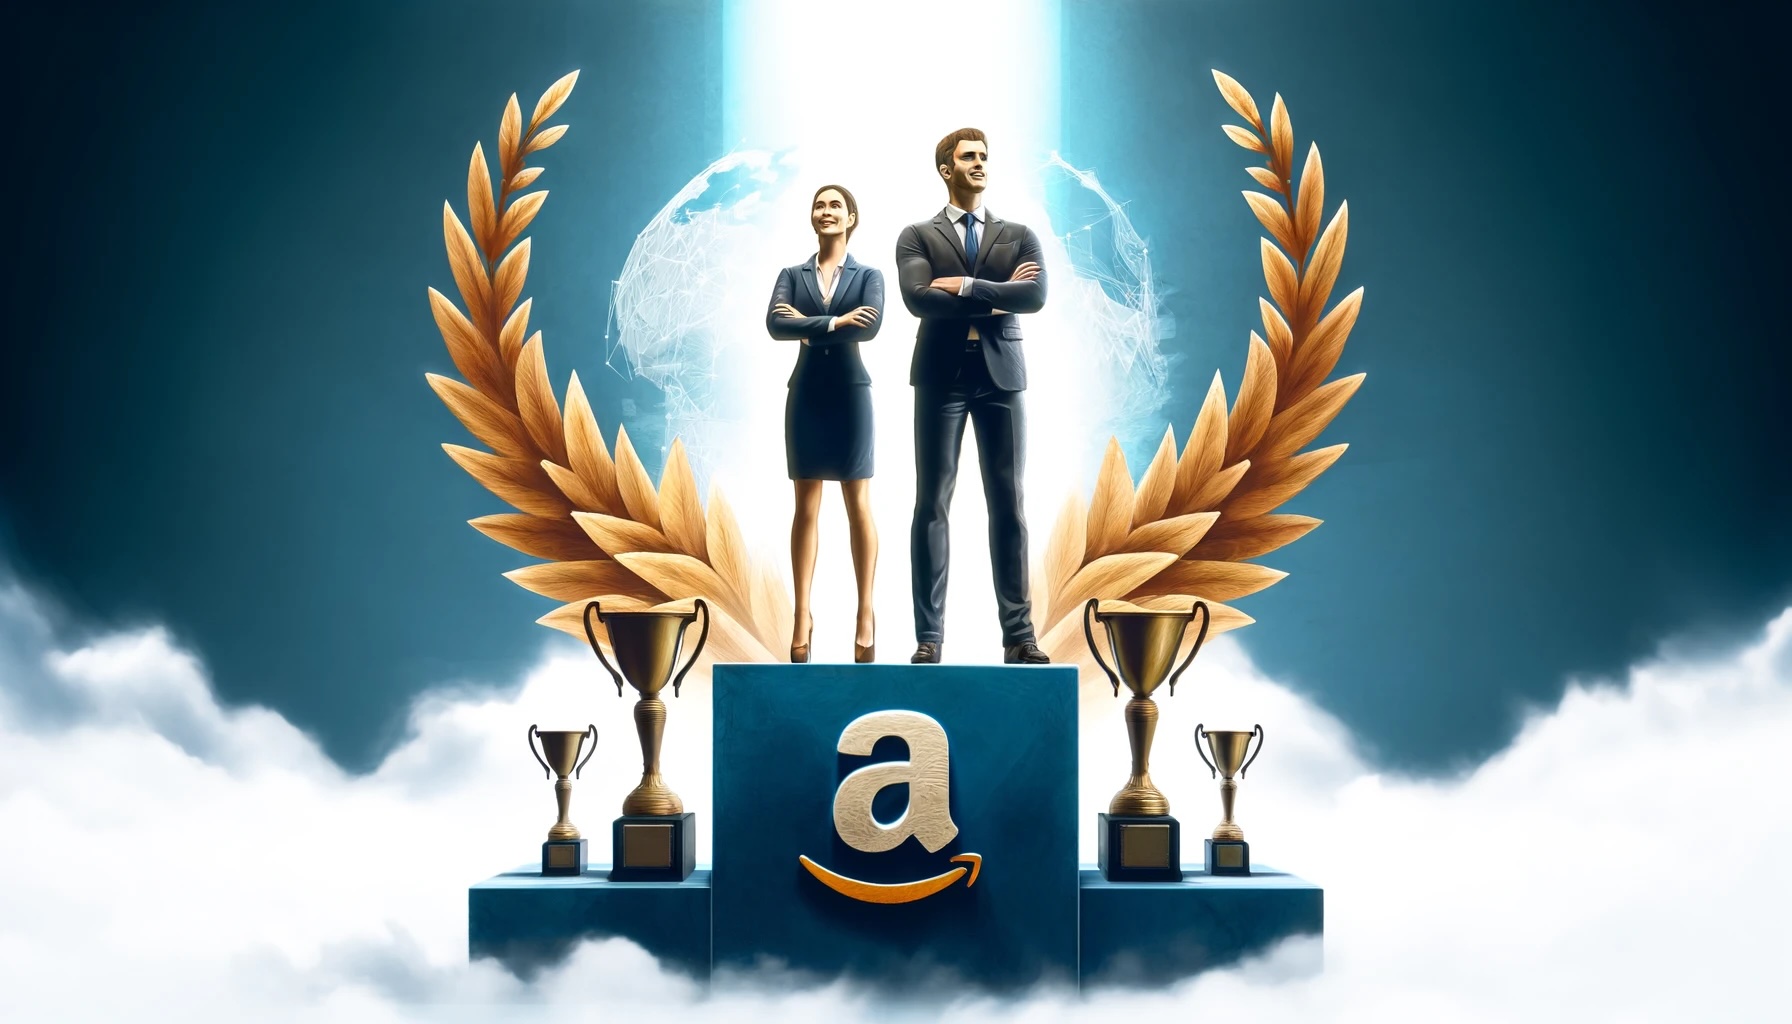 A male and a female ecommerce professional depicted on top of a trophy in a cloud-filled sky